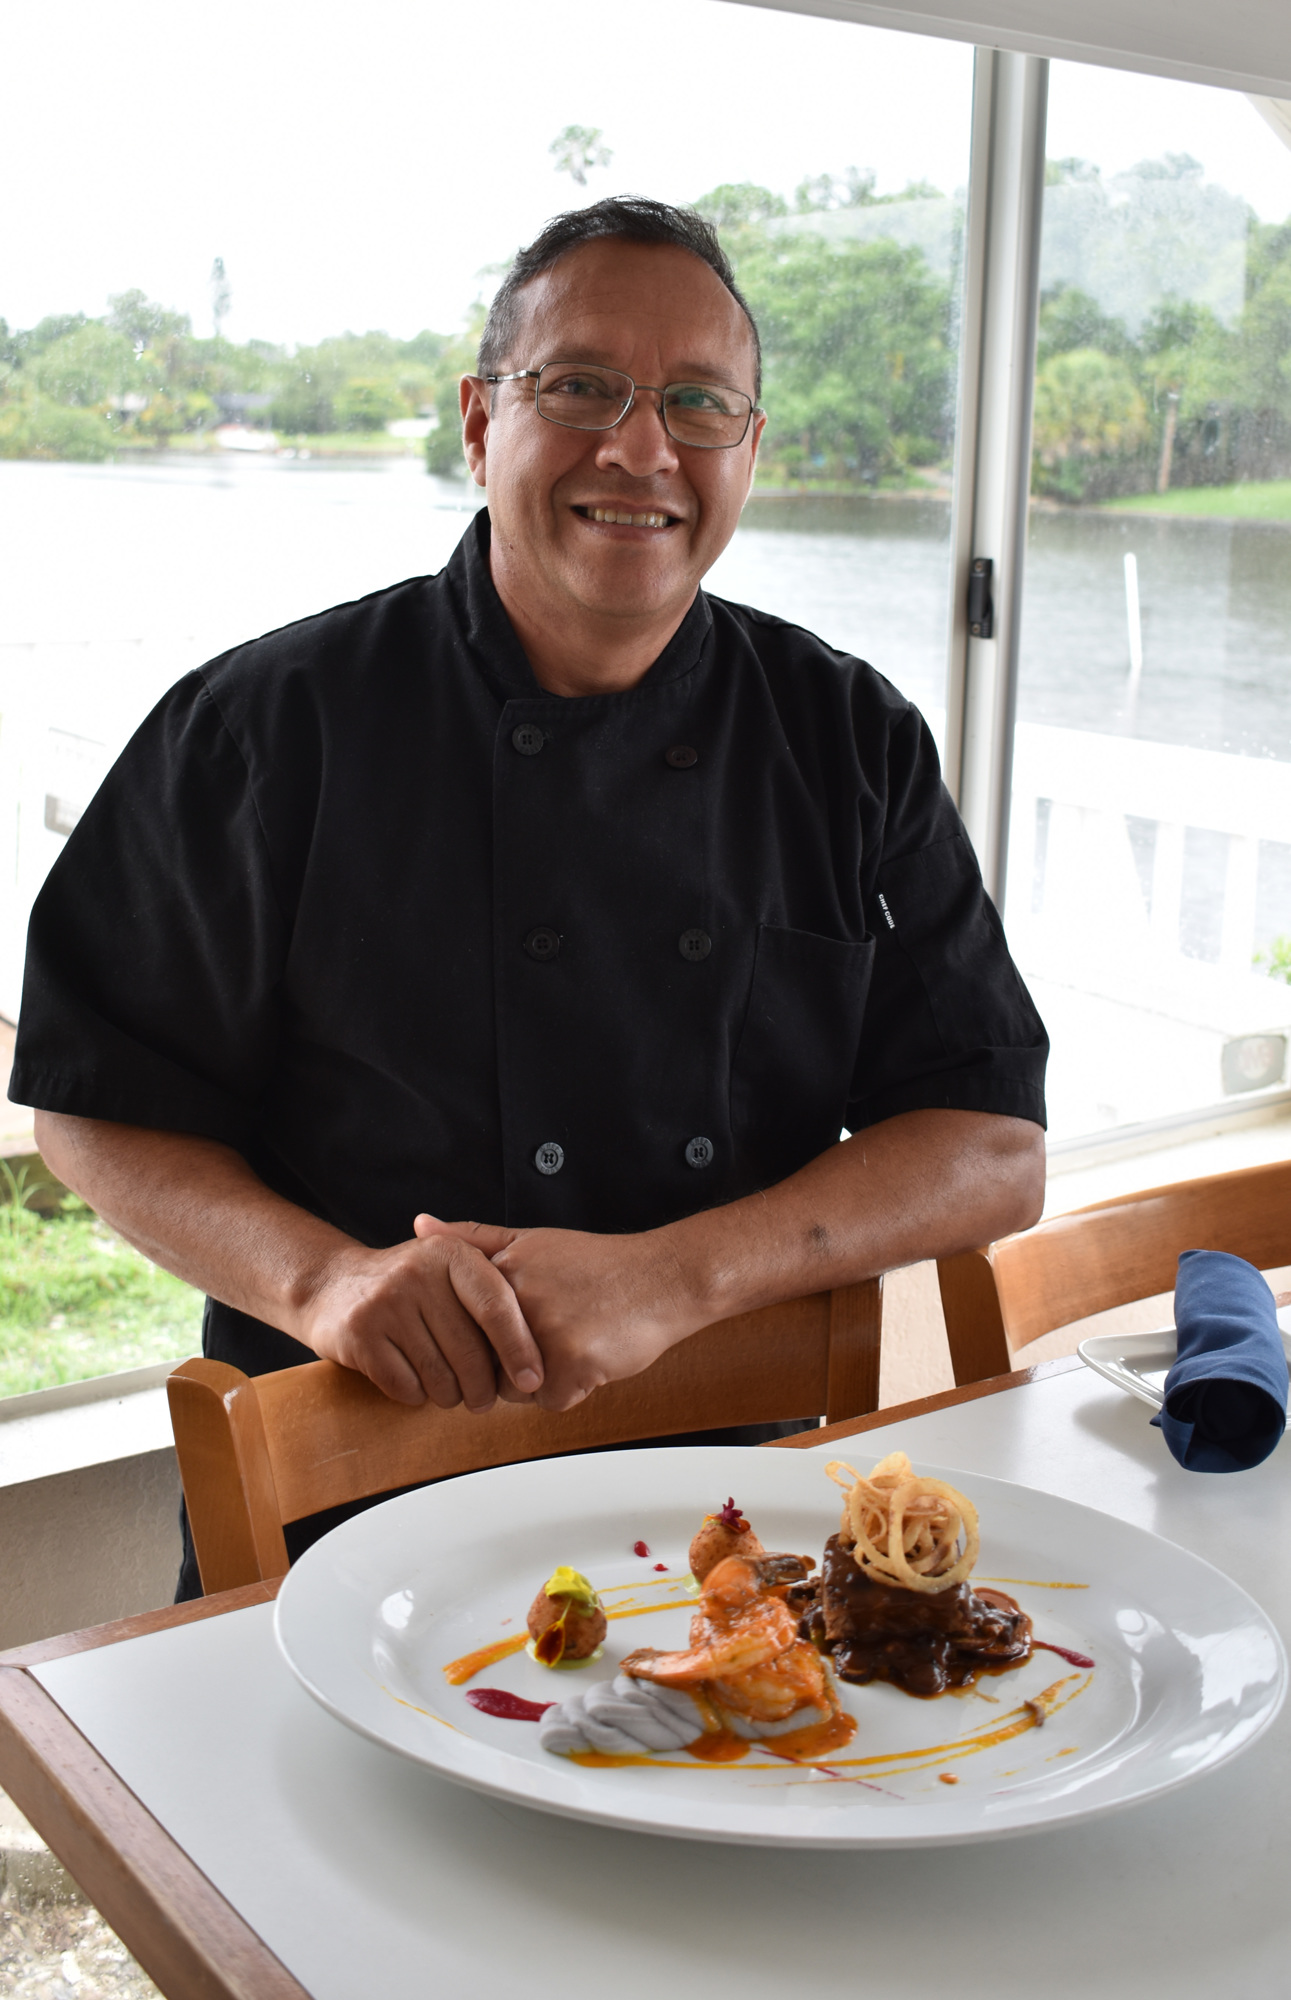 Chef Pedro Flores says the puebla land and sea dish is another one of his favorites because it combines fresh seafood with oven-roasted beef. Photo by Niki Kottmann